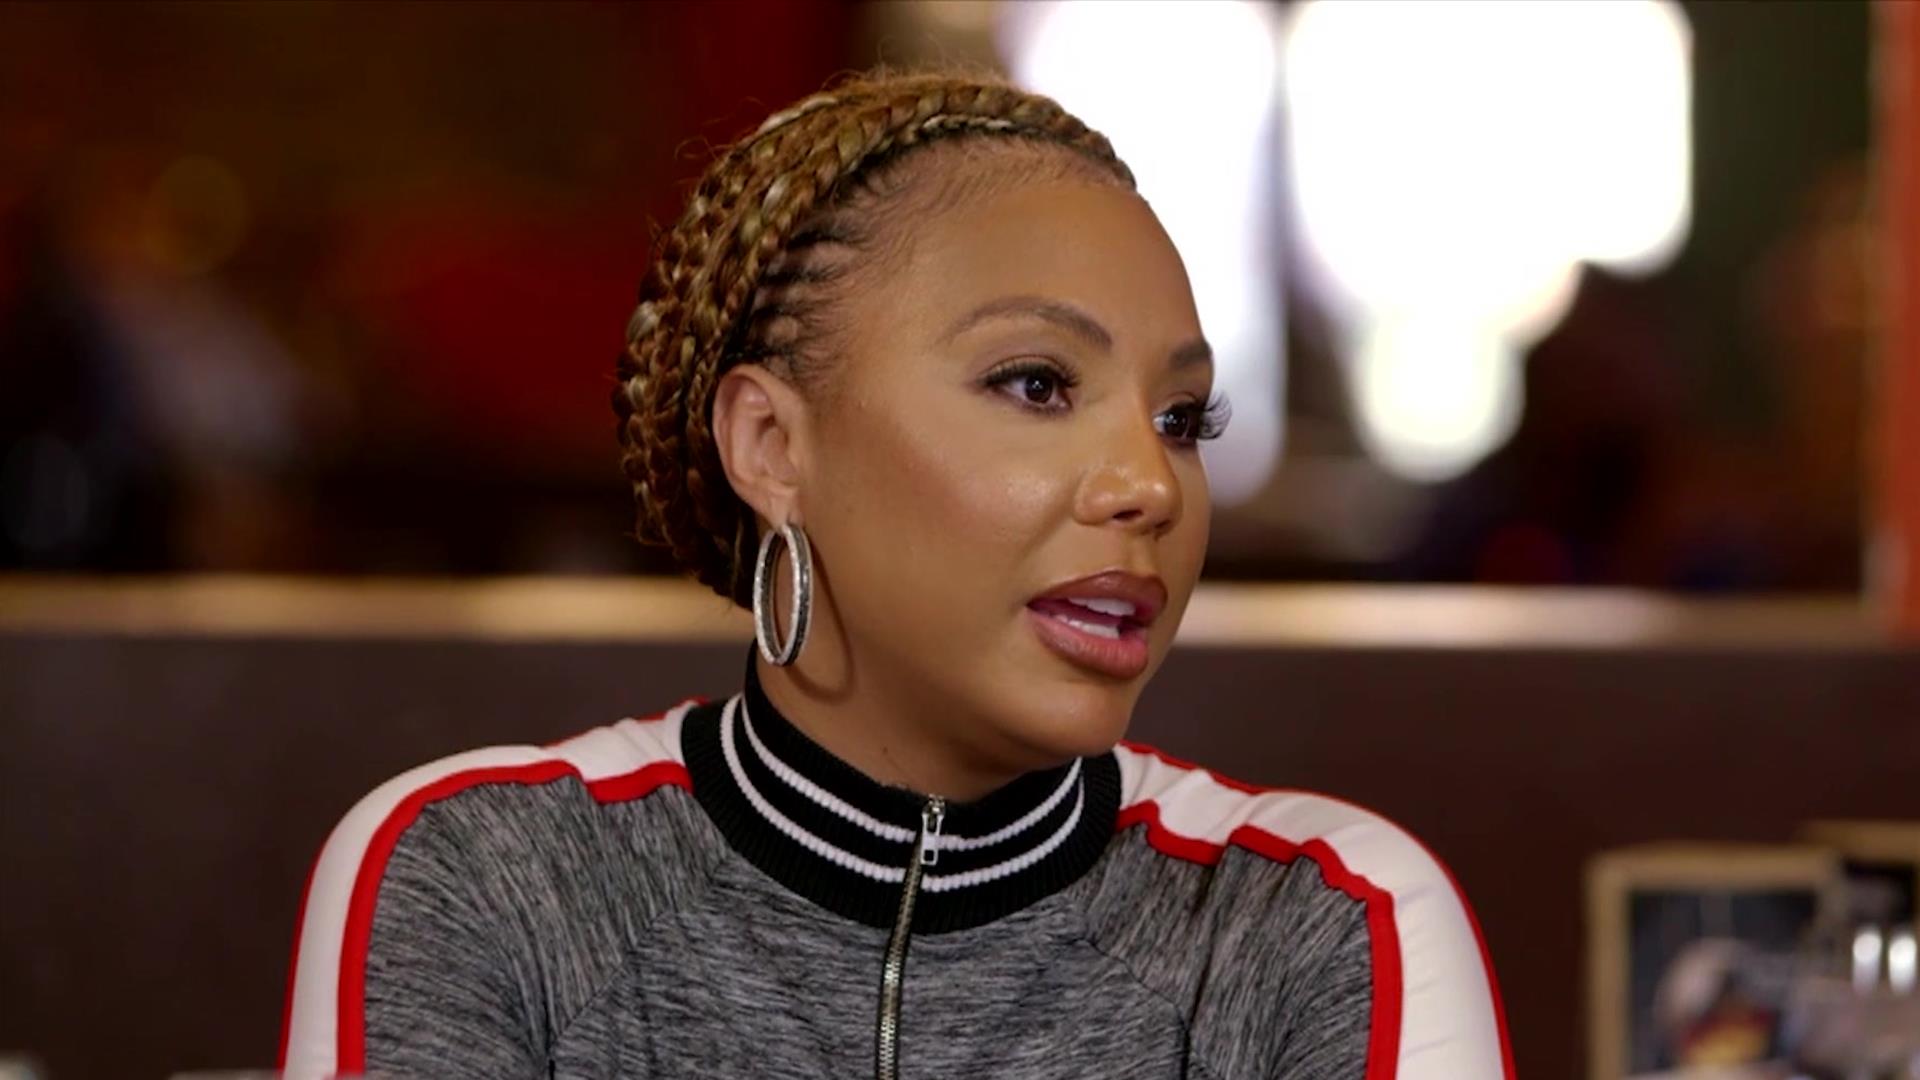 What's Really Going on Between Tamar & Vince?